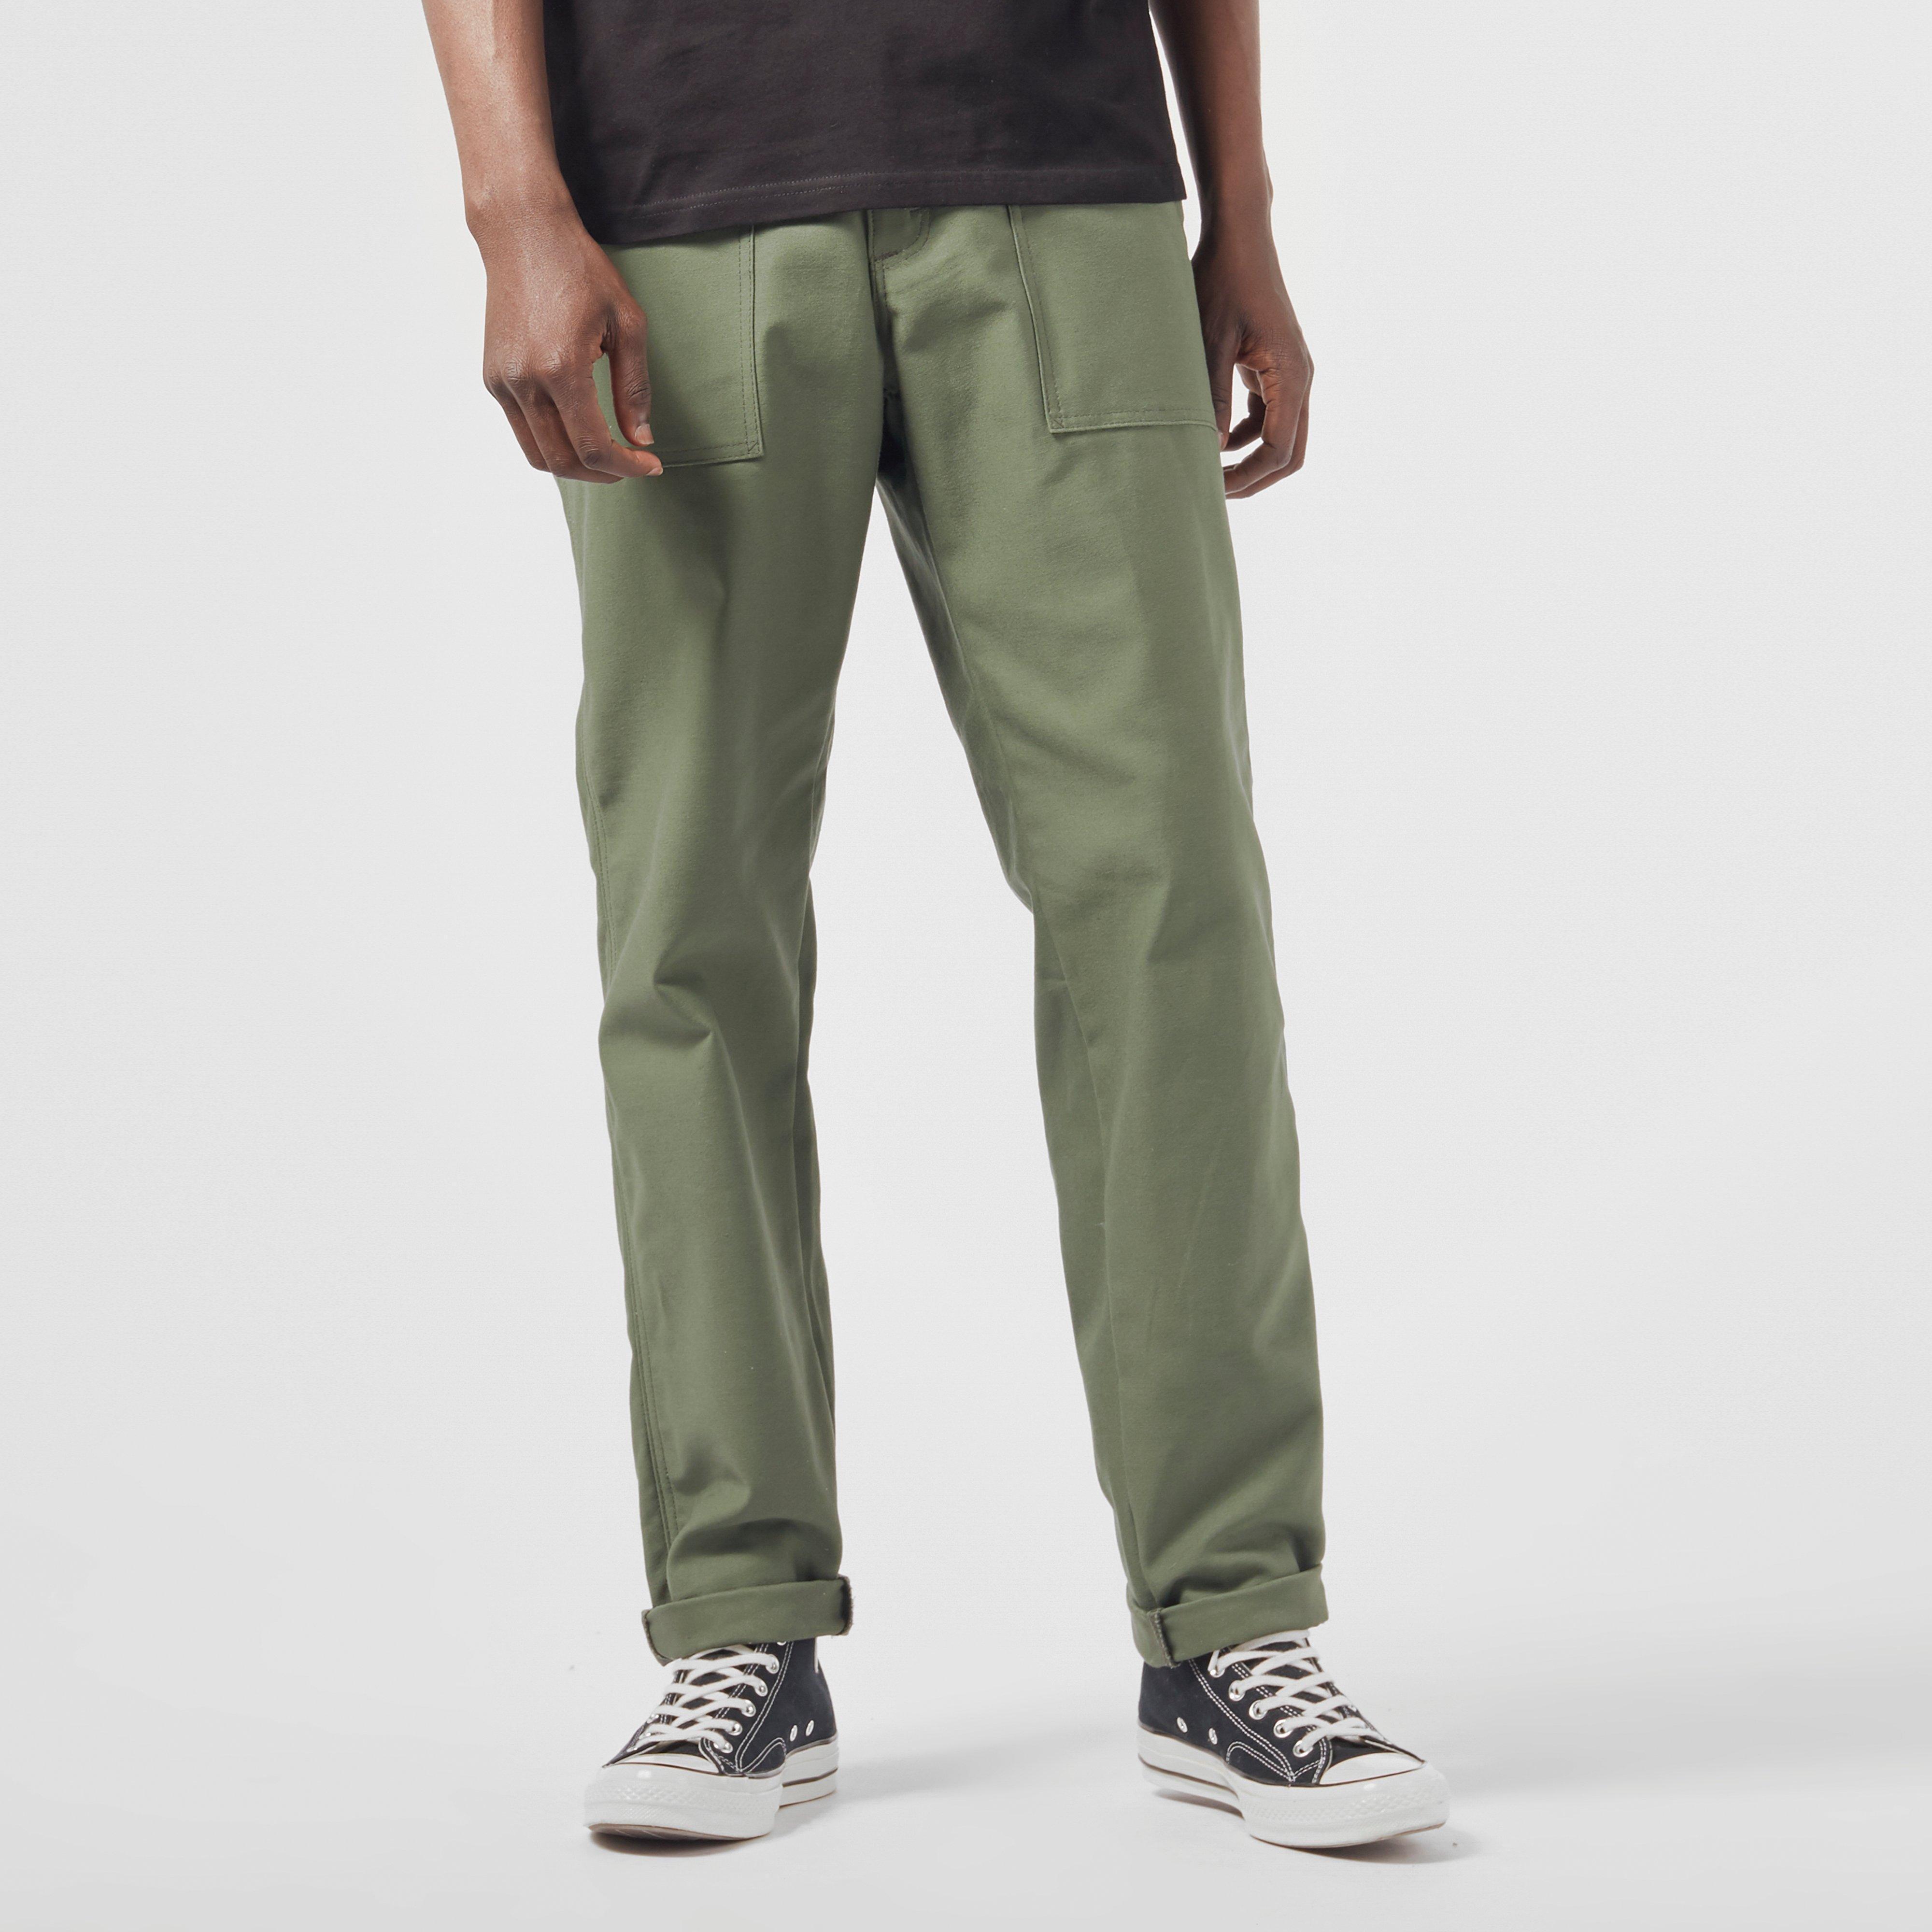 Stan Ray Taper Fatigue Pants in Green/Olive (Green) for Men - Lyst